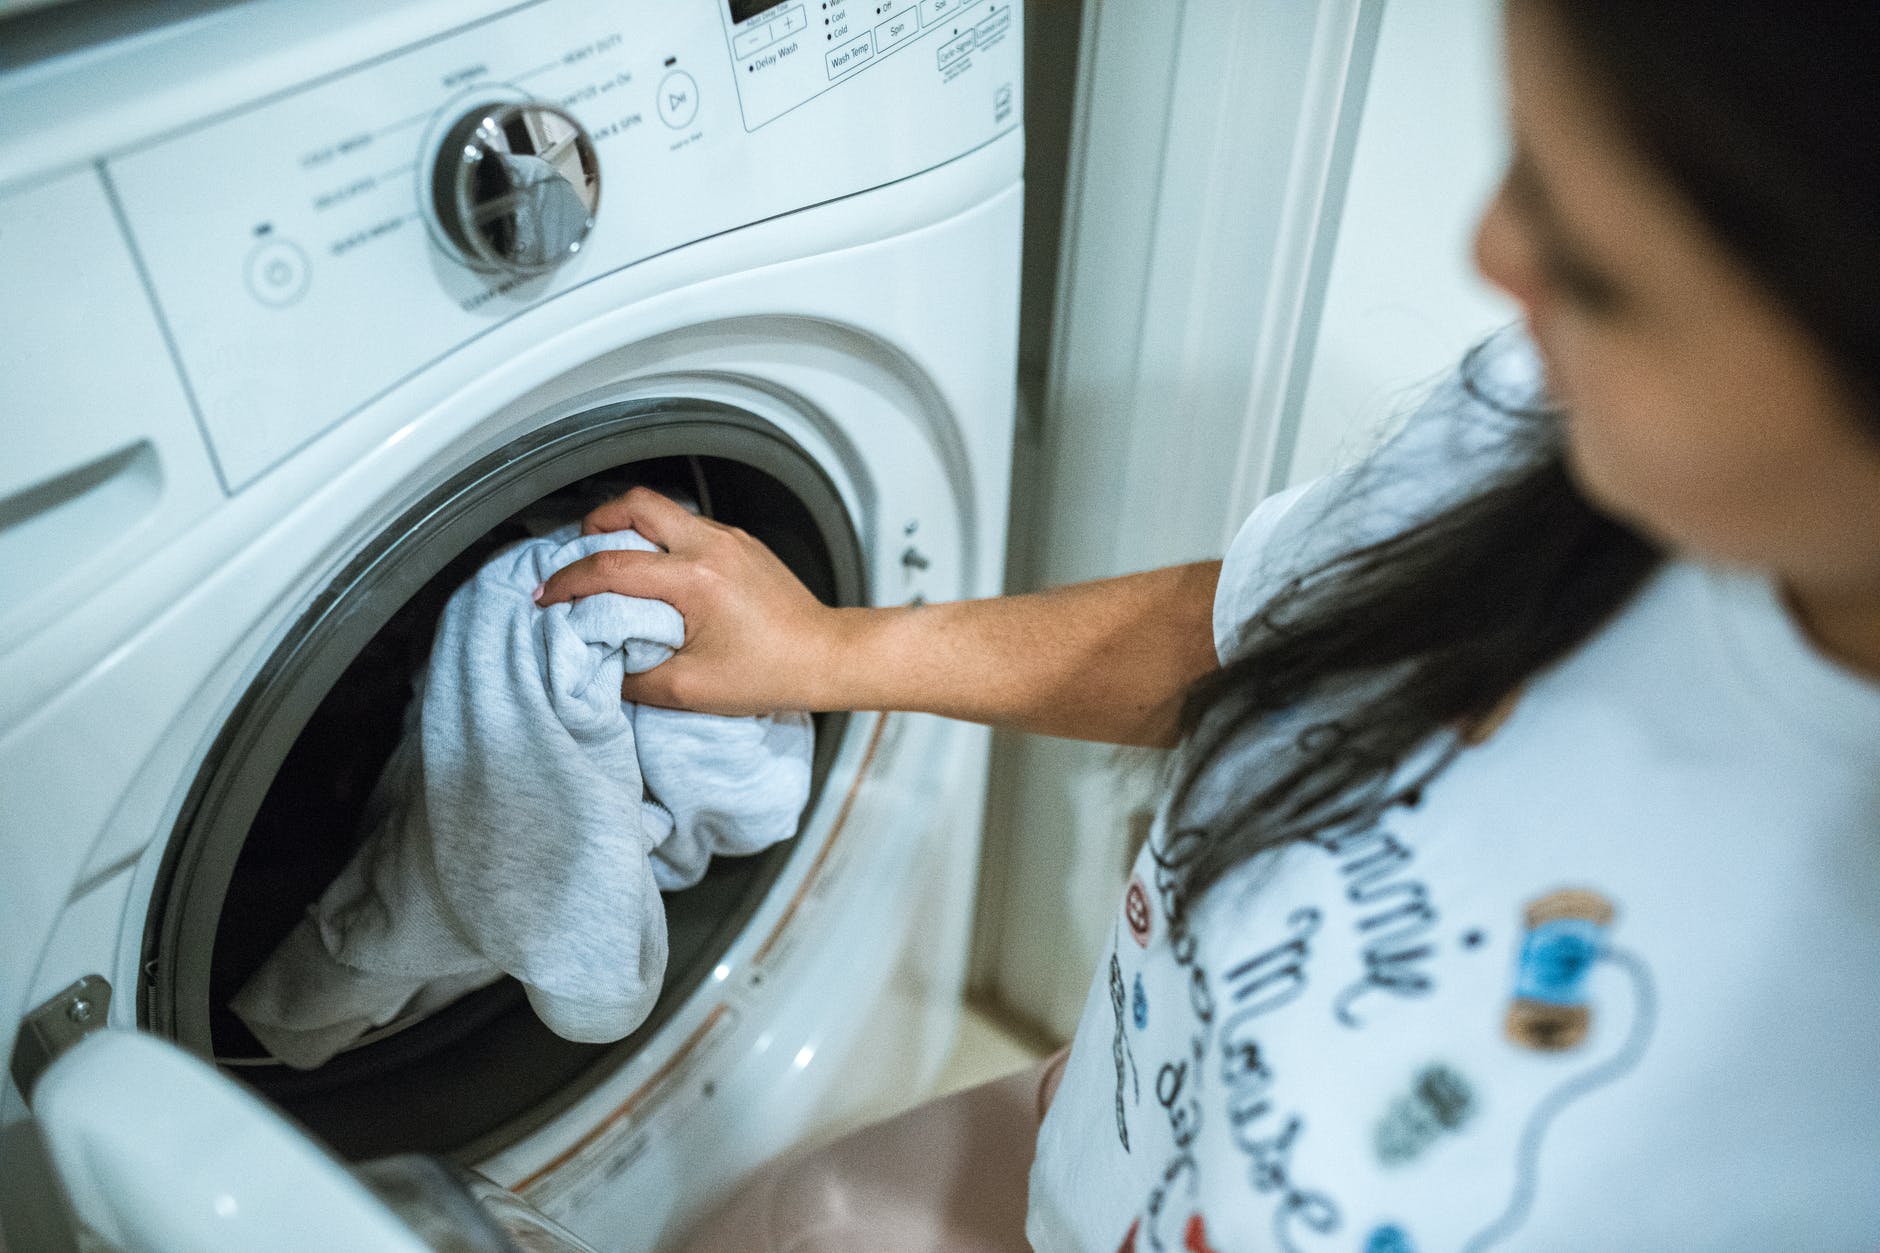 woman in gray shirt standing in front of white front load washing machine